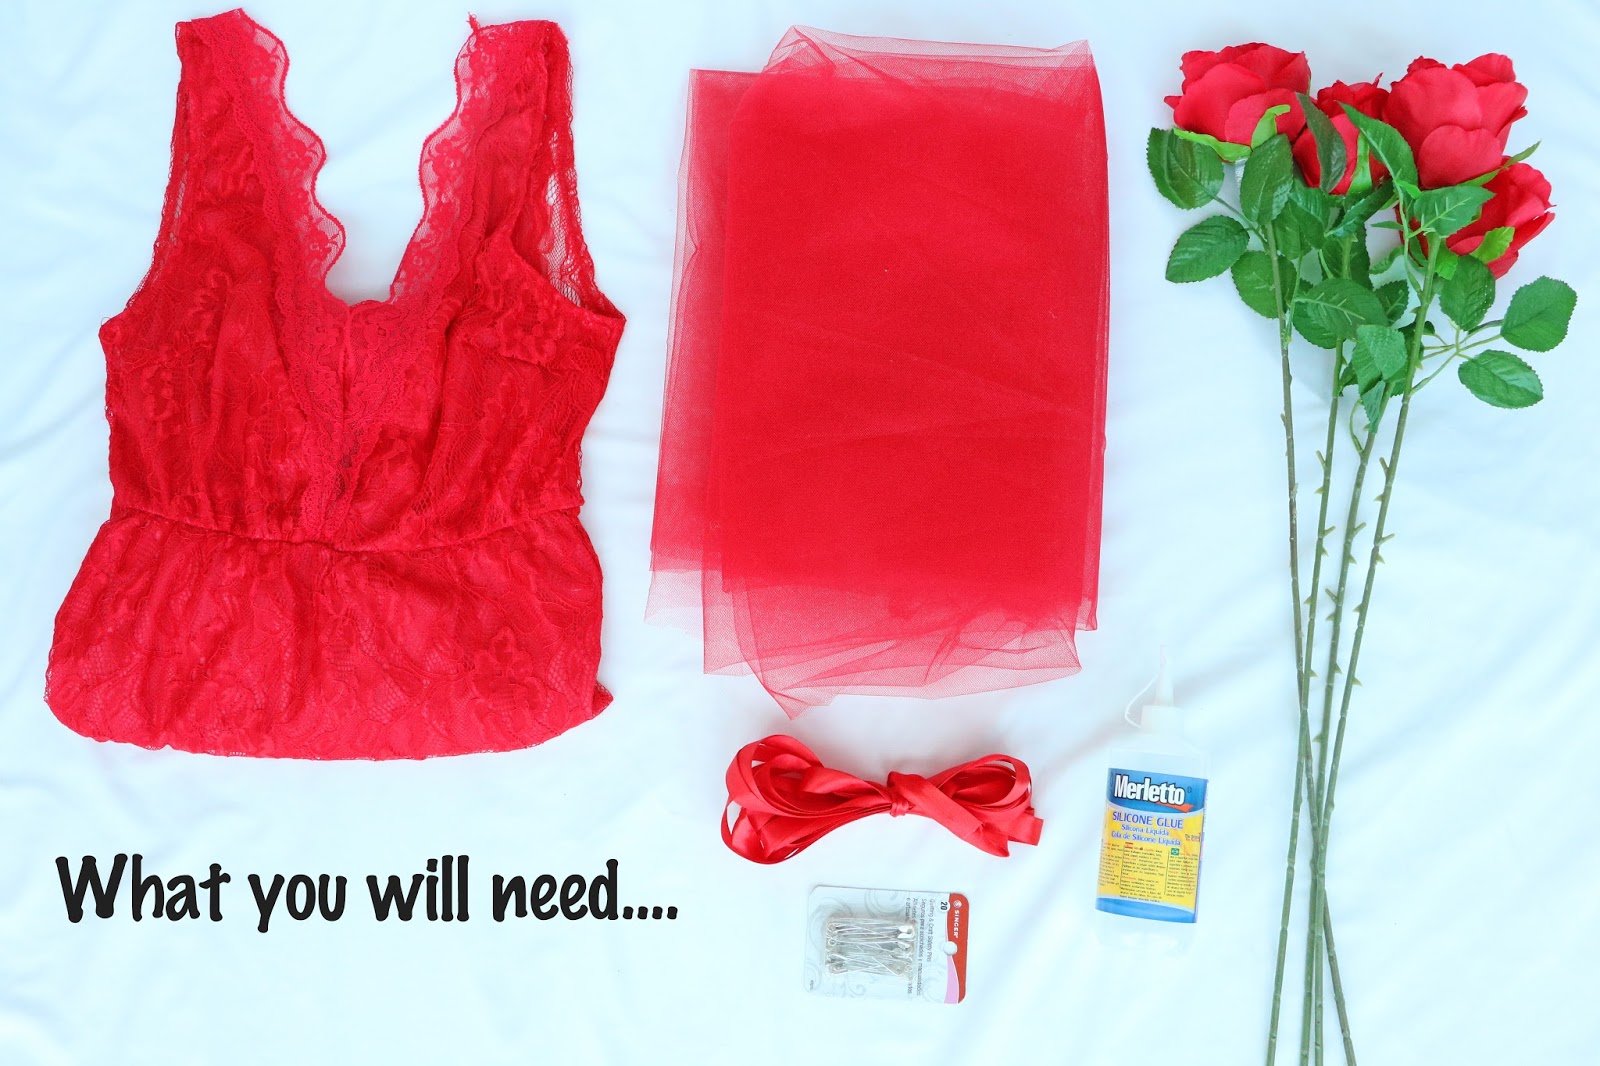 DIY Dress makeover inspired by the Enchanted Rose from Beauty and the Beast! Click through for full tutorial